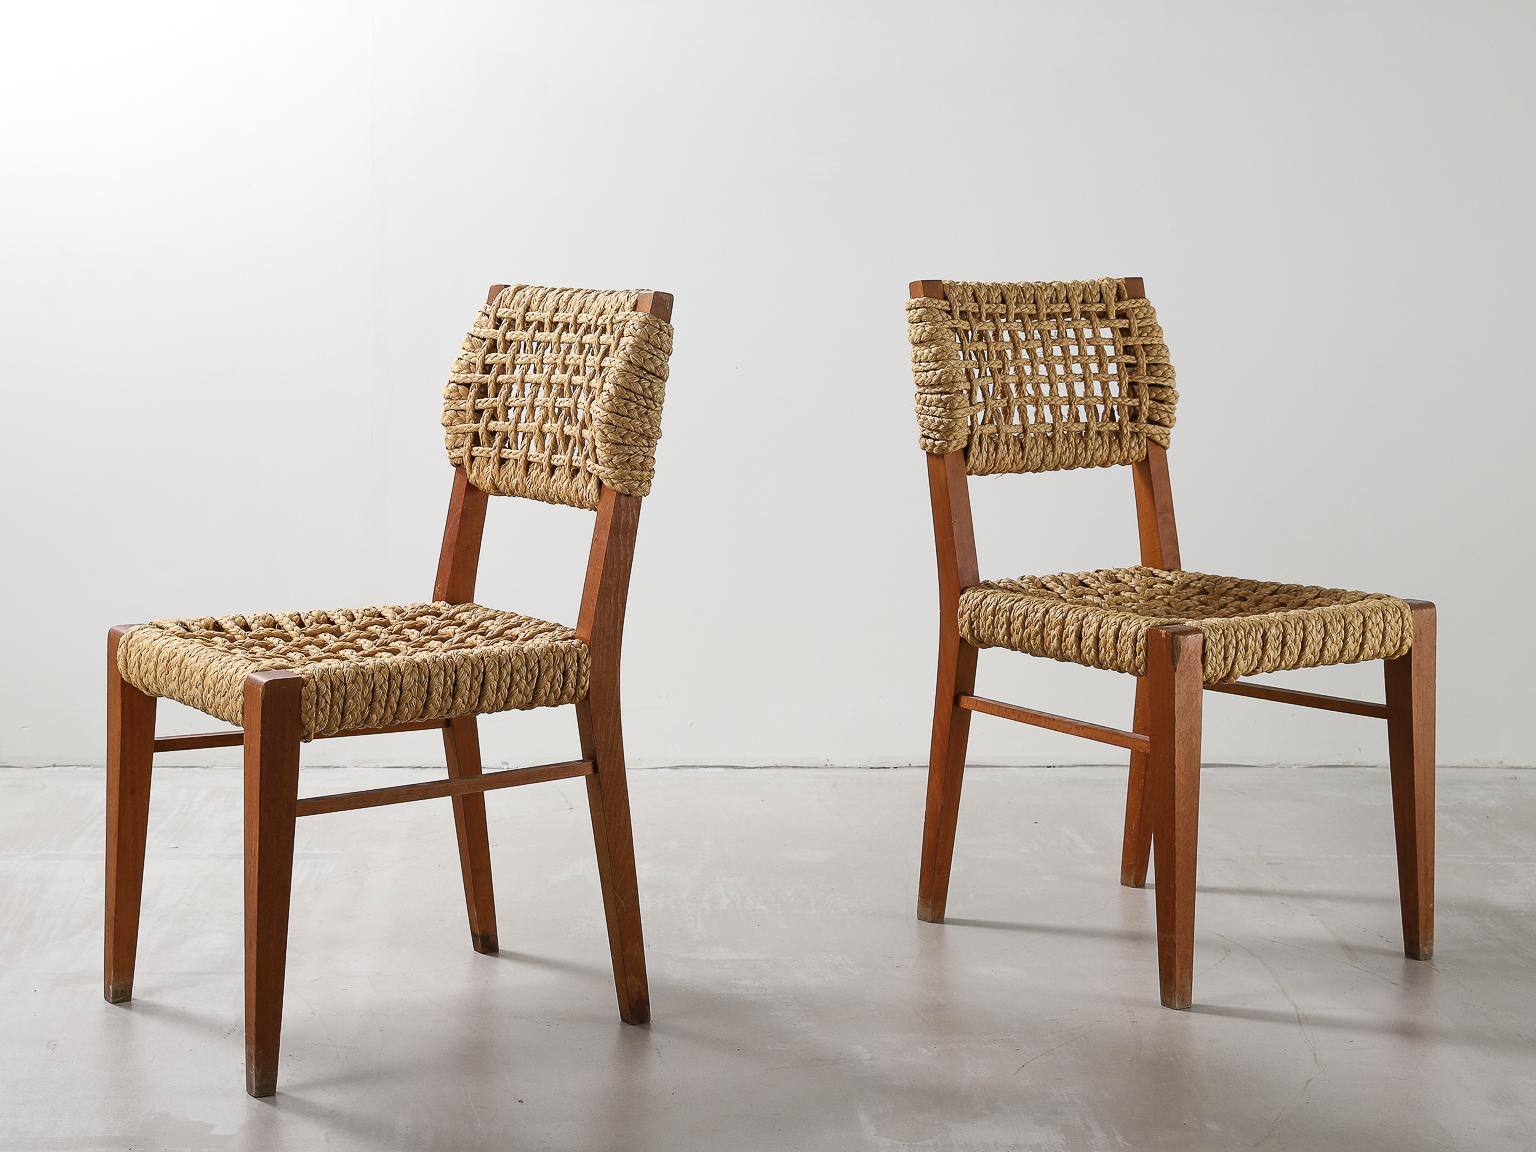 Pair of beech and woven rope dining chairs by Adrien Audoux and Frida Minet. 1950s

A French couple, Adrien Audoux and Frida Minet, where designers in the 1940s and 1950s. They mainly designed using the combination of wood and rope.